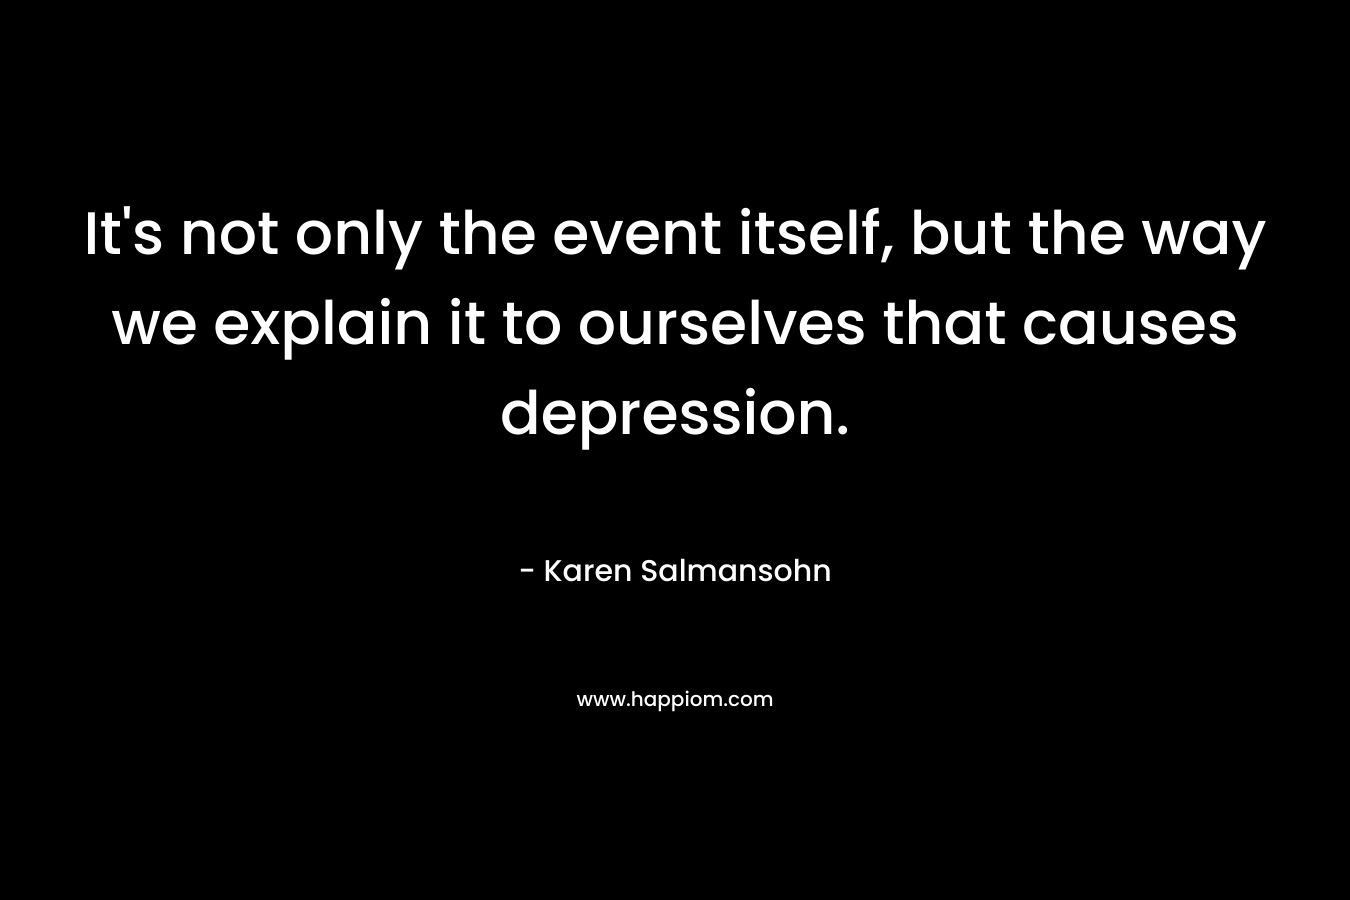 It’s not only the event itself, but the way we explain it to ourselves that causes depression. – Karen Salmansohn